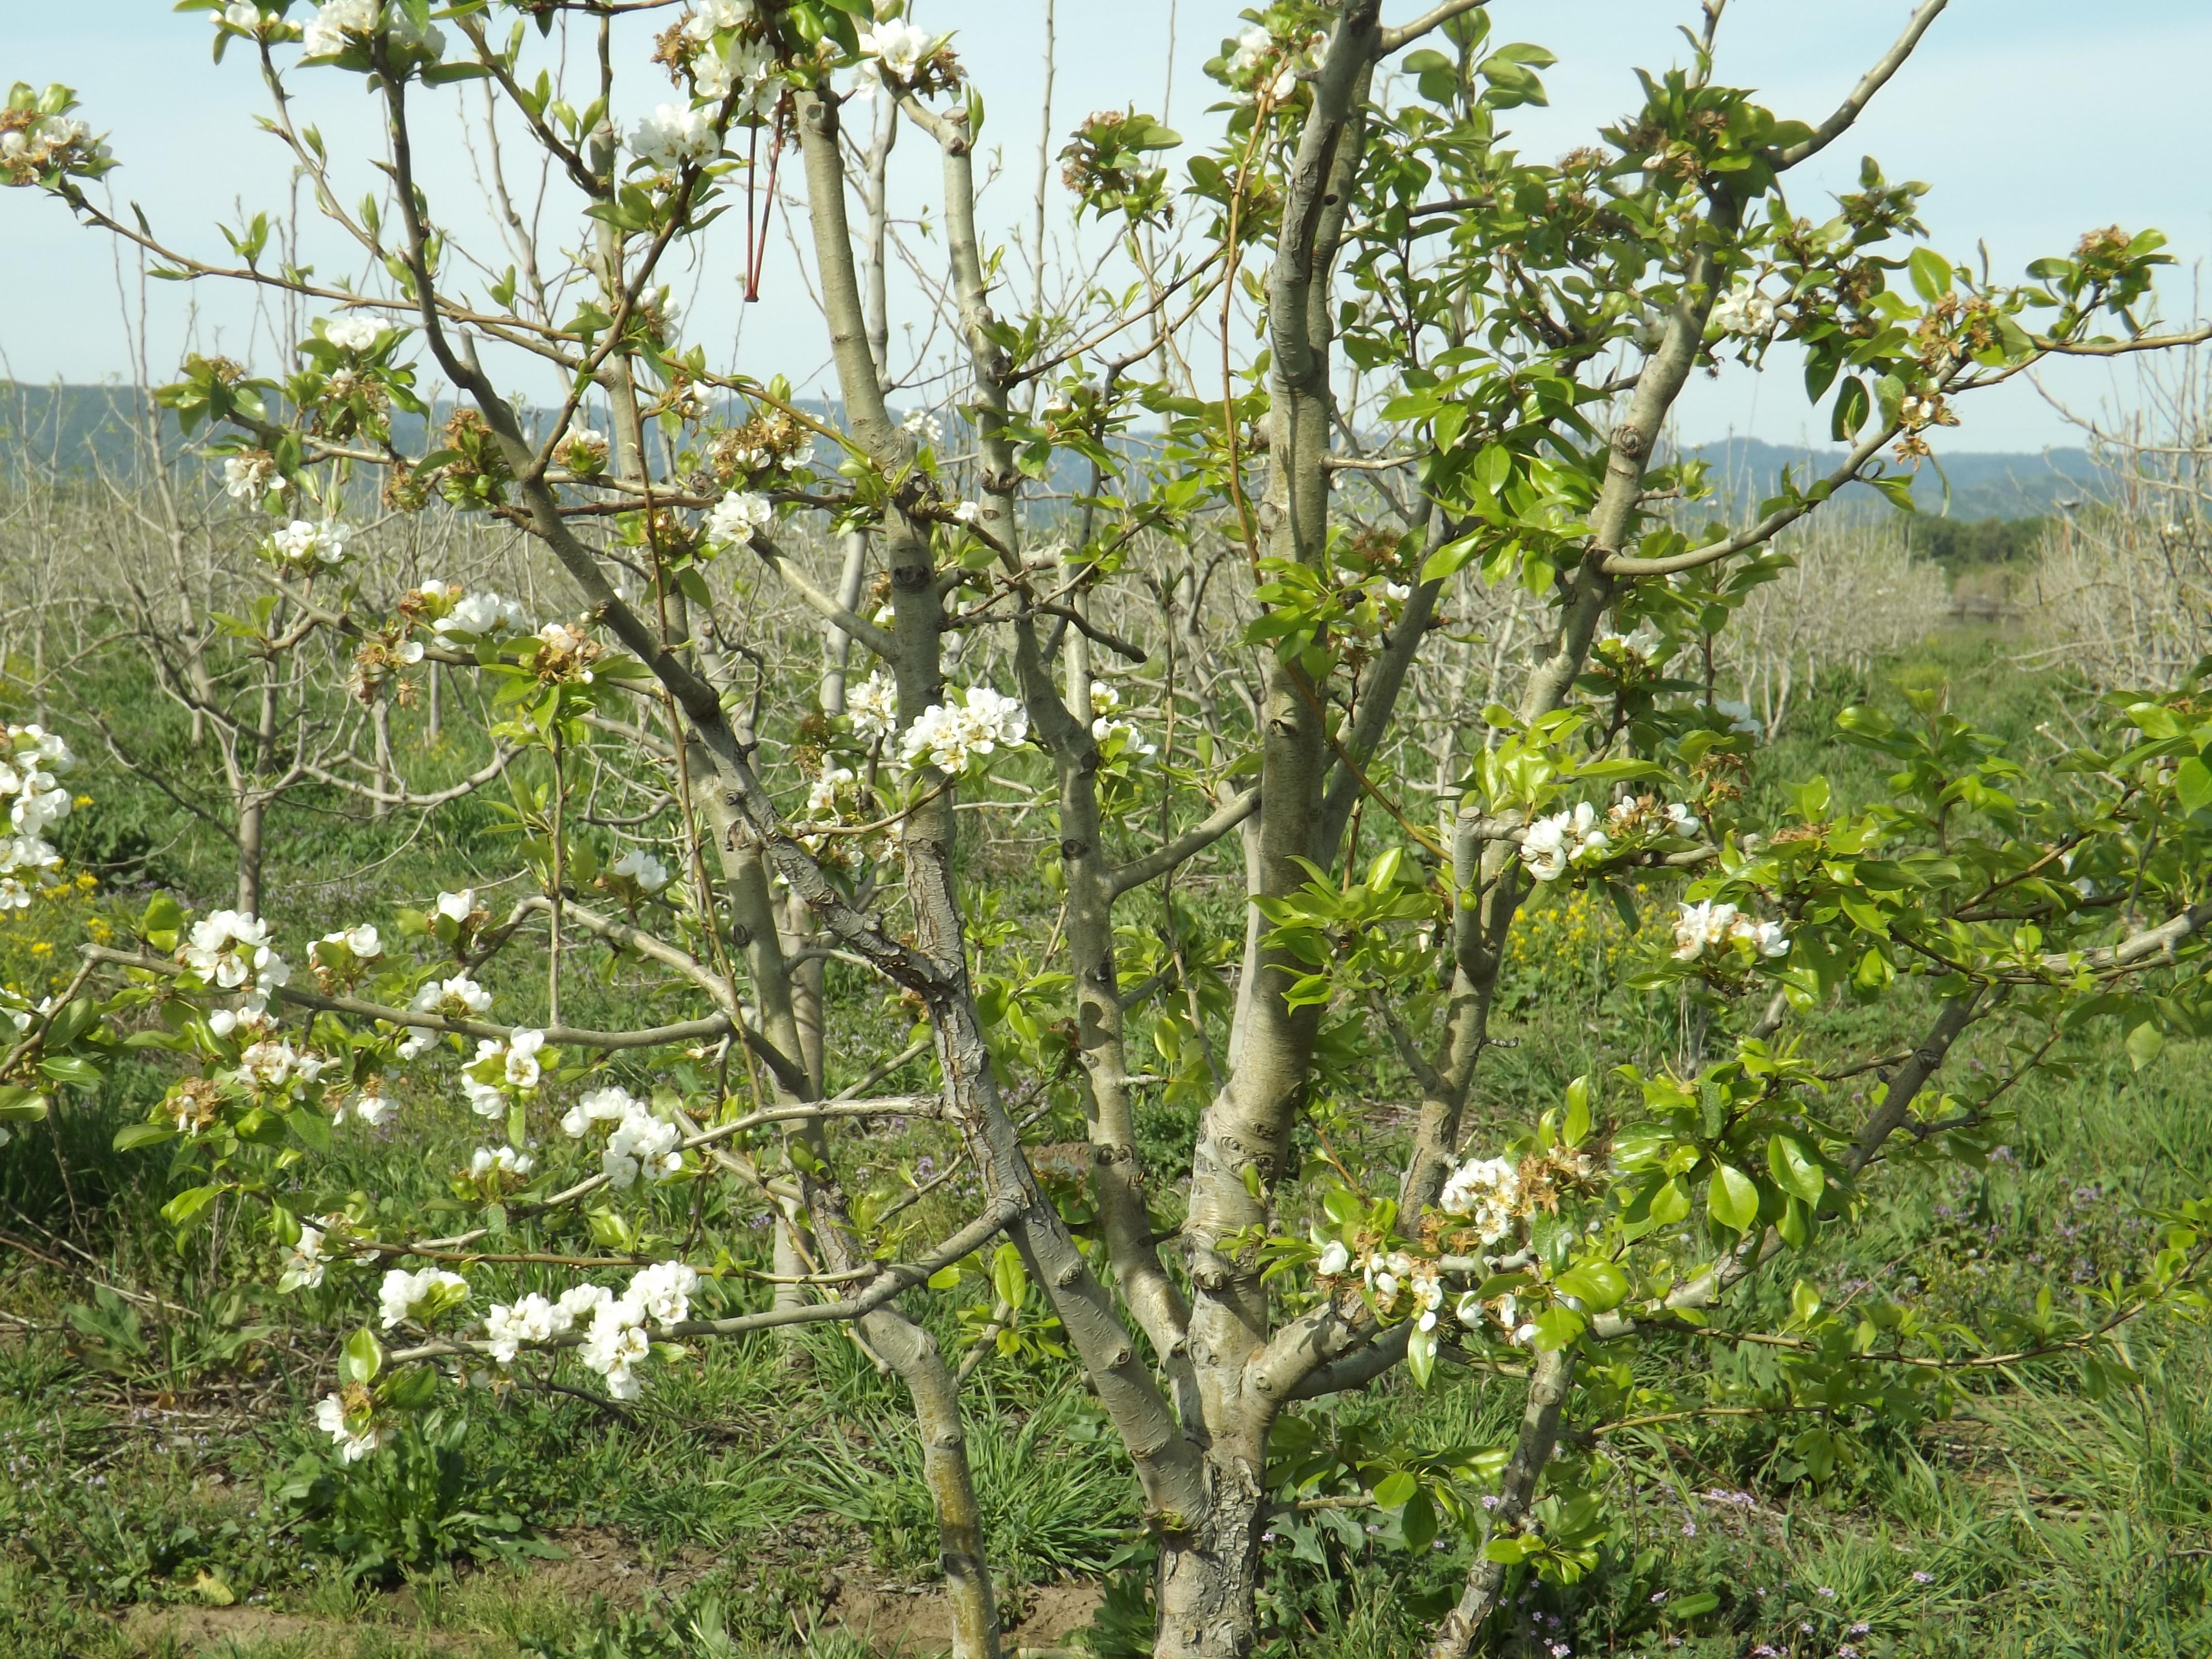 Pear tree showing uneven leafing out and flowering due to inadequate winter chilling.